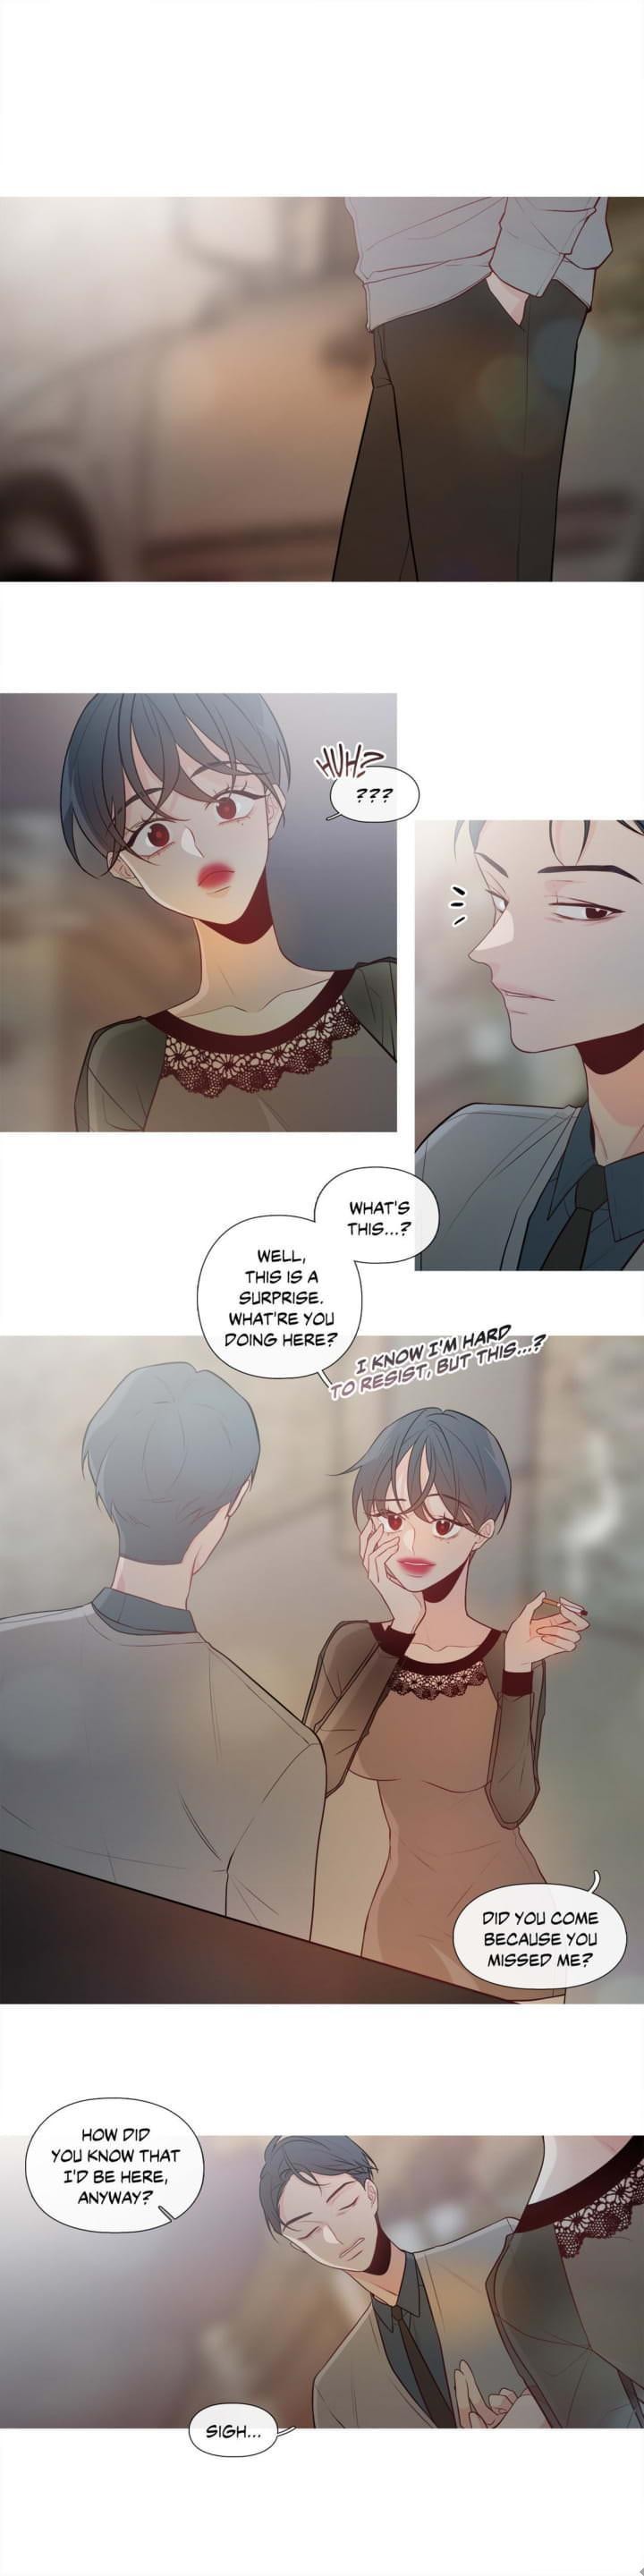 Two Birds in Spring - Chapter 8 Page 2